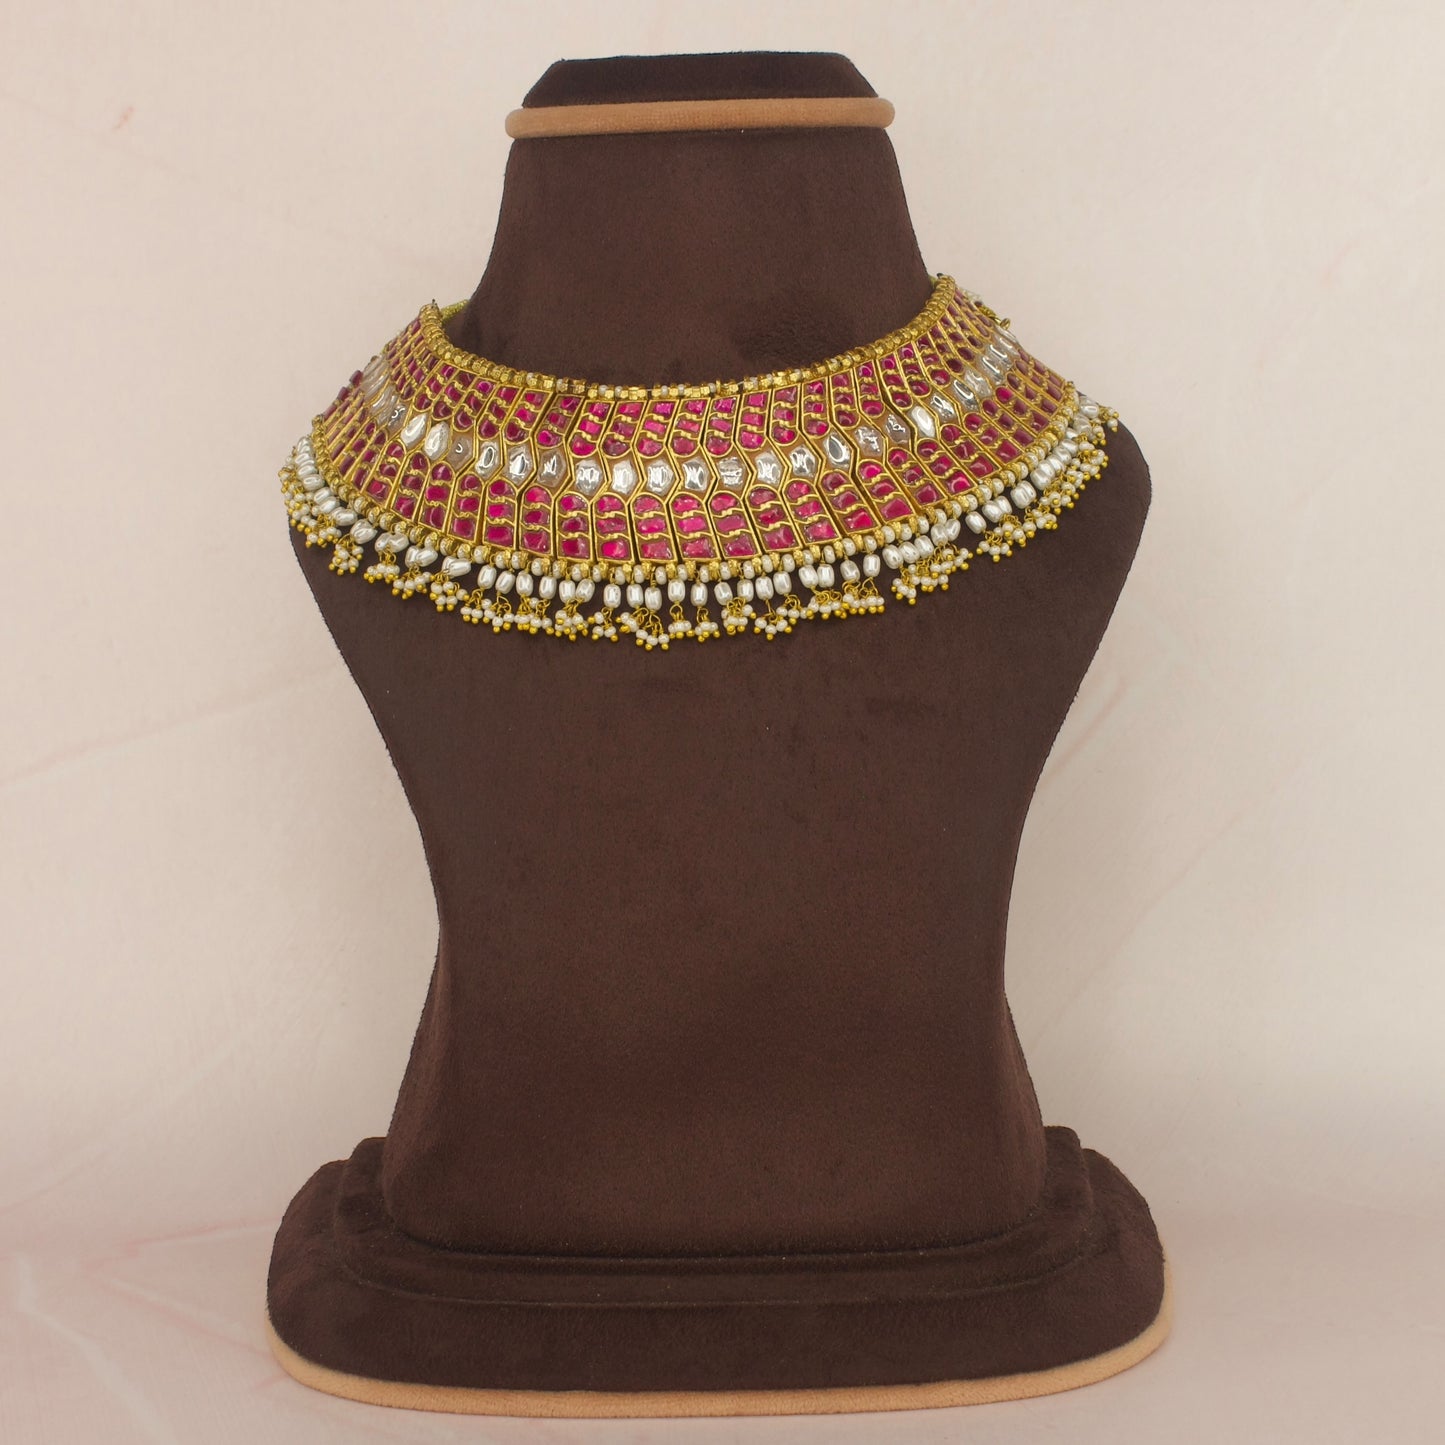 This is A jadau Kundan choker cum short necklace set in ruby stones. The piece is covered with 22k Gold plating and at the bottom of the piece we have Ricepearls